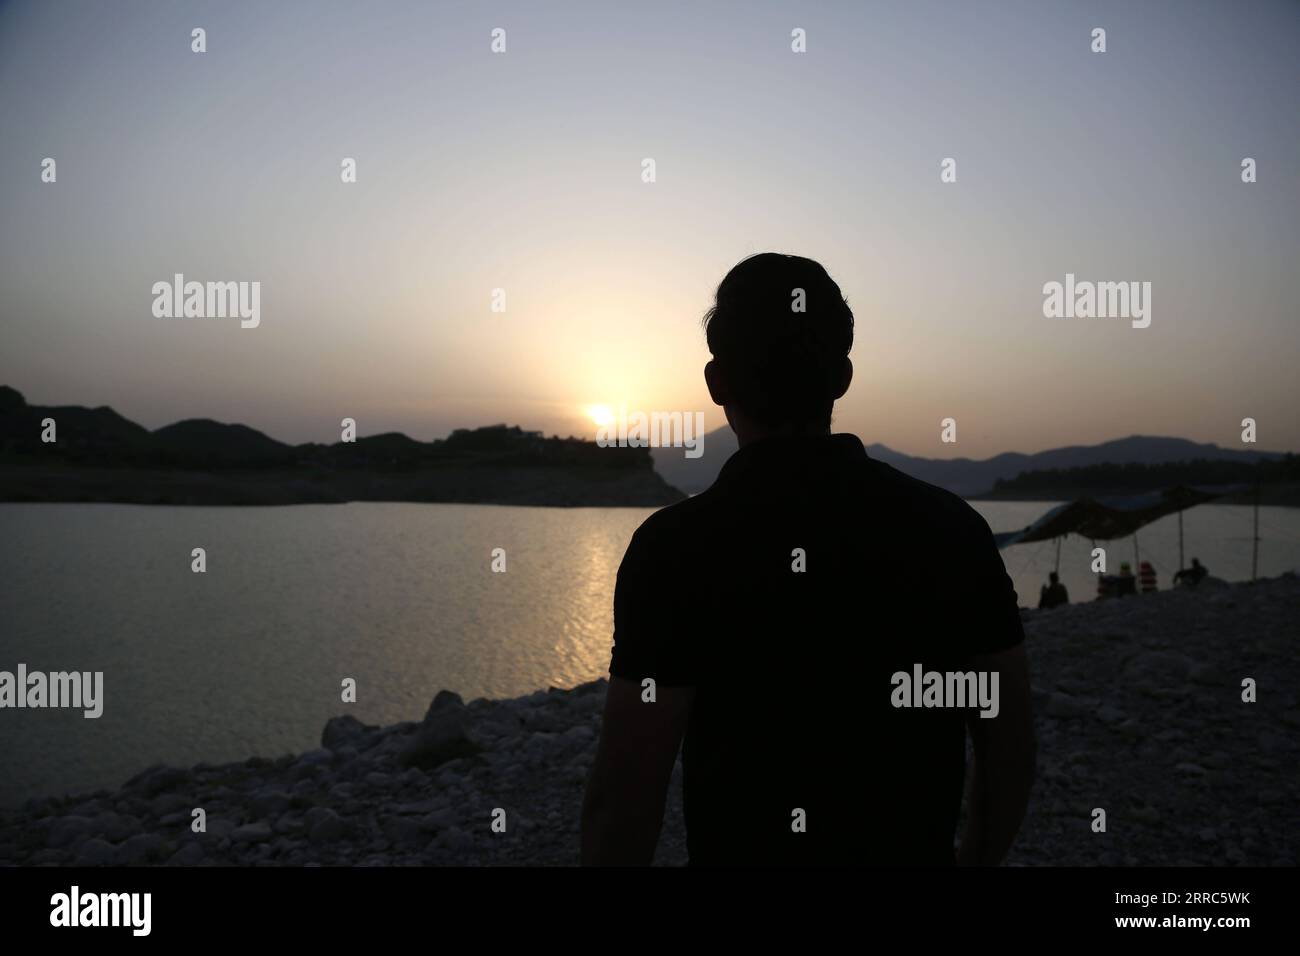 211019 -- KHANPUR, Oct. 19, 2021 -- Photo taken on Oct. 19, 2021 shows a man enjoying the view of sunset at Khanpur Lake in Khanpur of Pakistan s northwestern Khyber Pakhtunkhwa province.  PAKISTAN-KHANPUR-LAKE-SUNSET AhmadxKamal PUBLICATIONxNOTxINxCHN Stock Photo